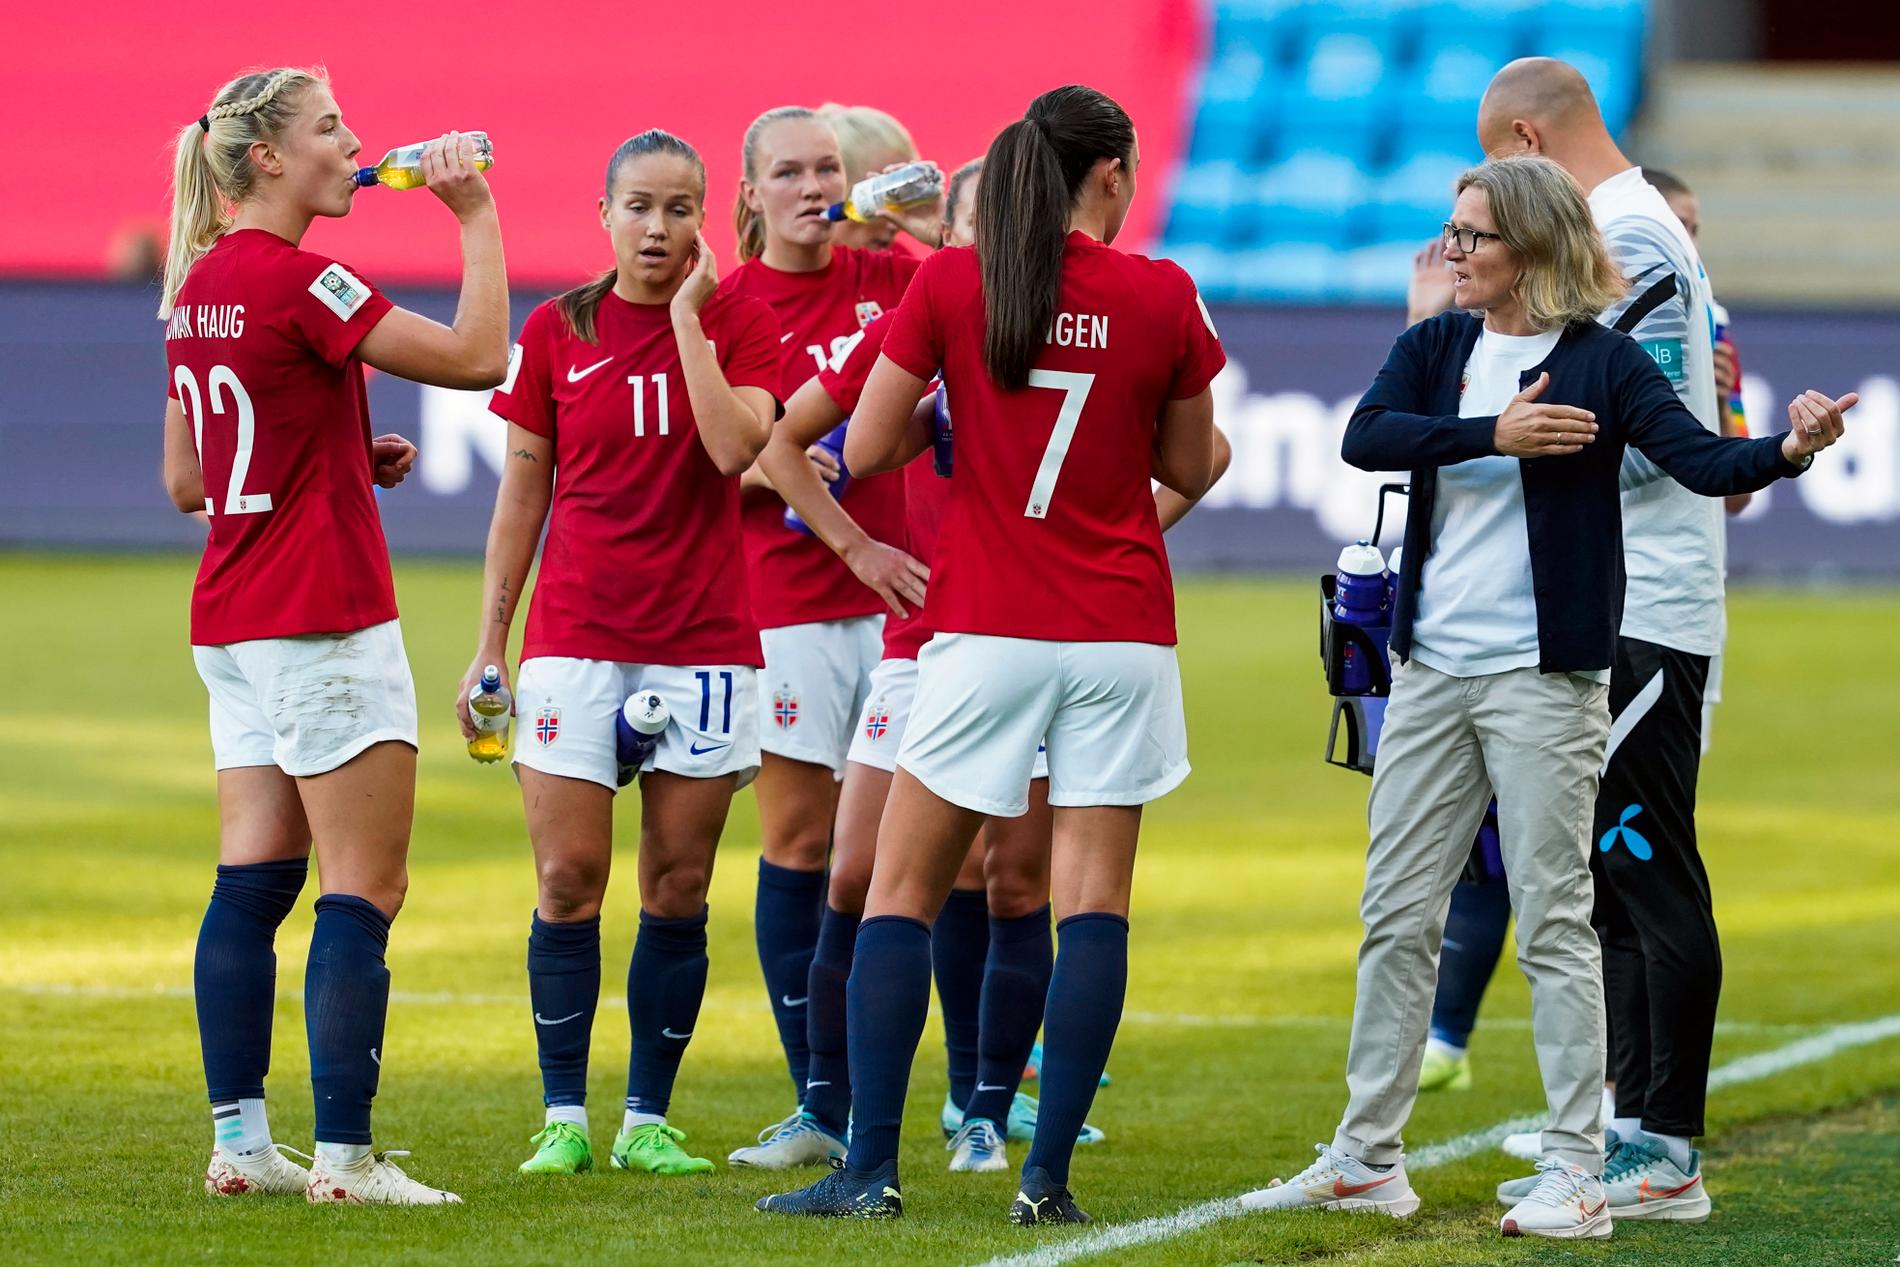 Norway’s toughest opposition should give a lesson before WC – VG